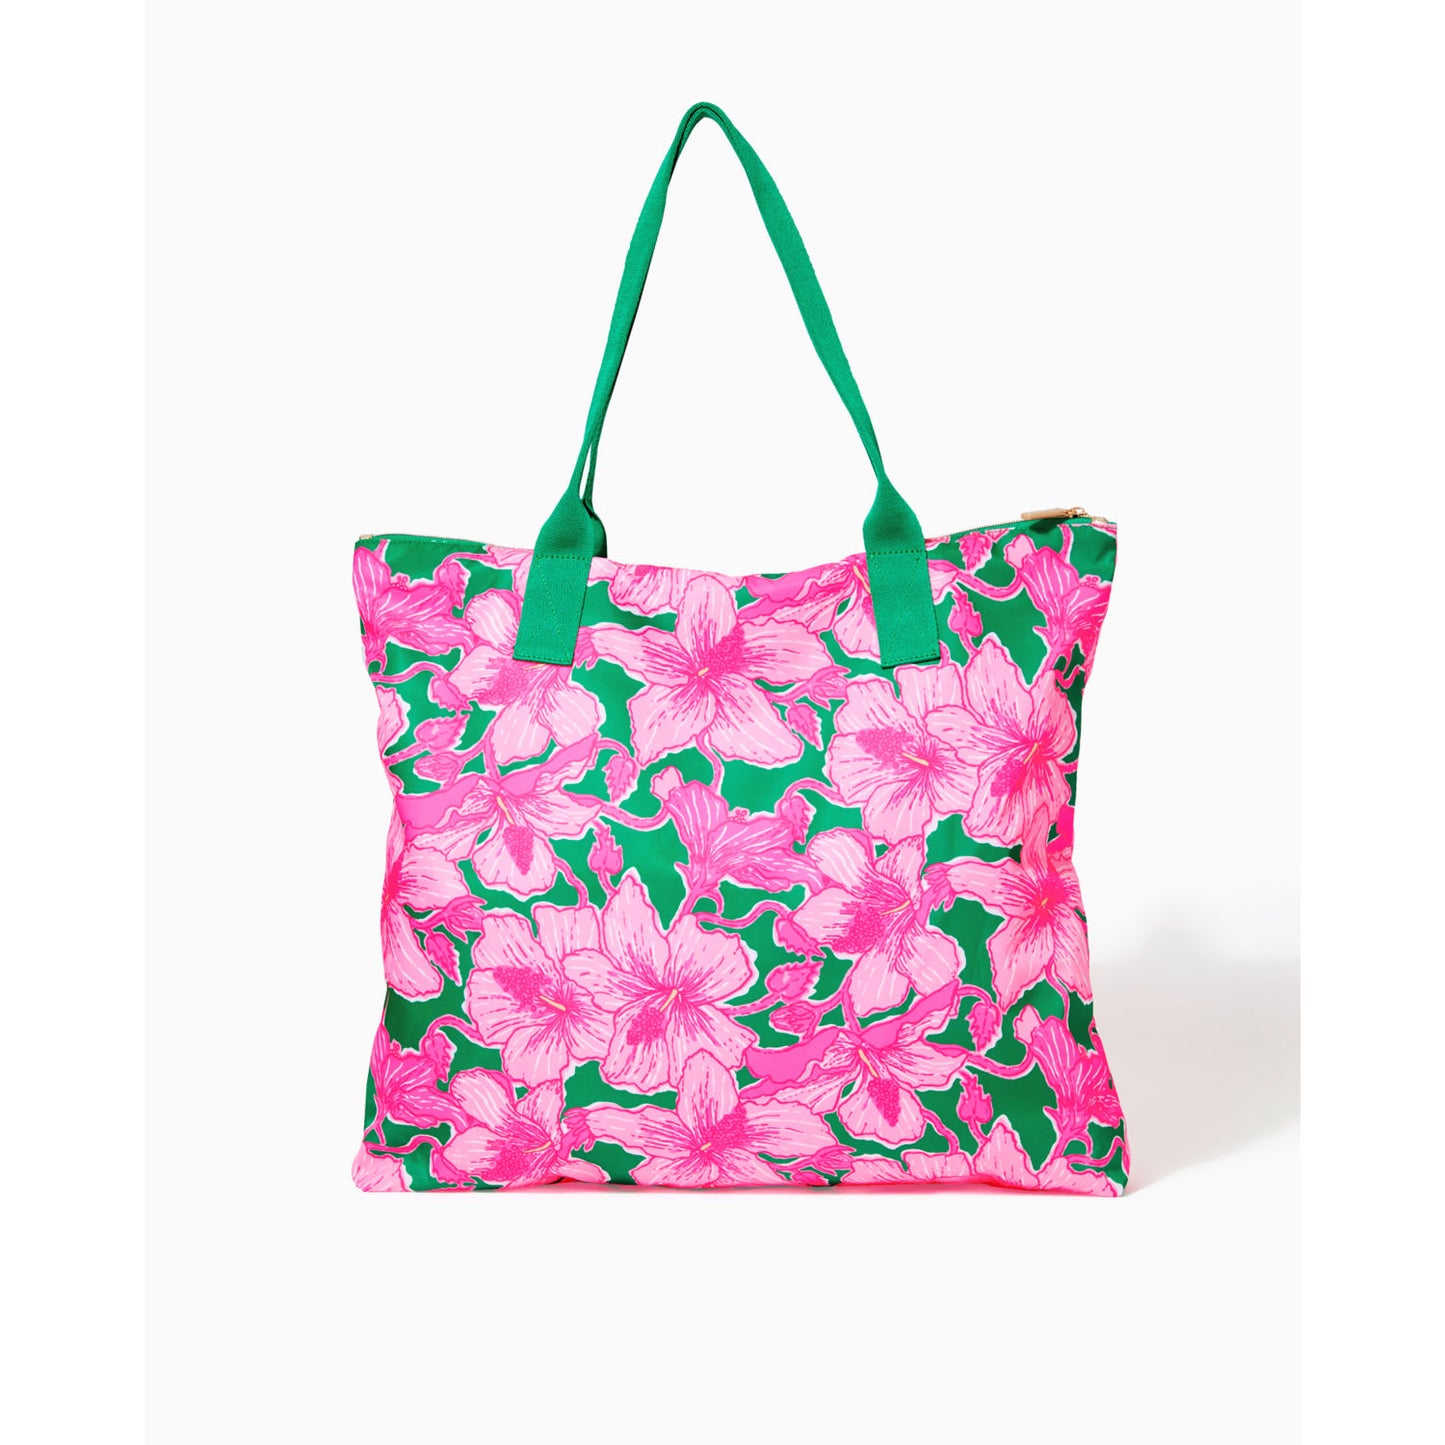 PIPER PACKABLE TOTE